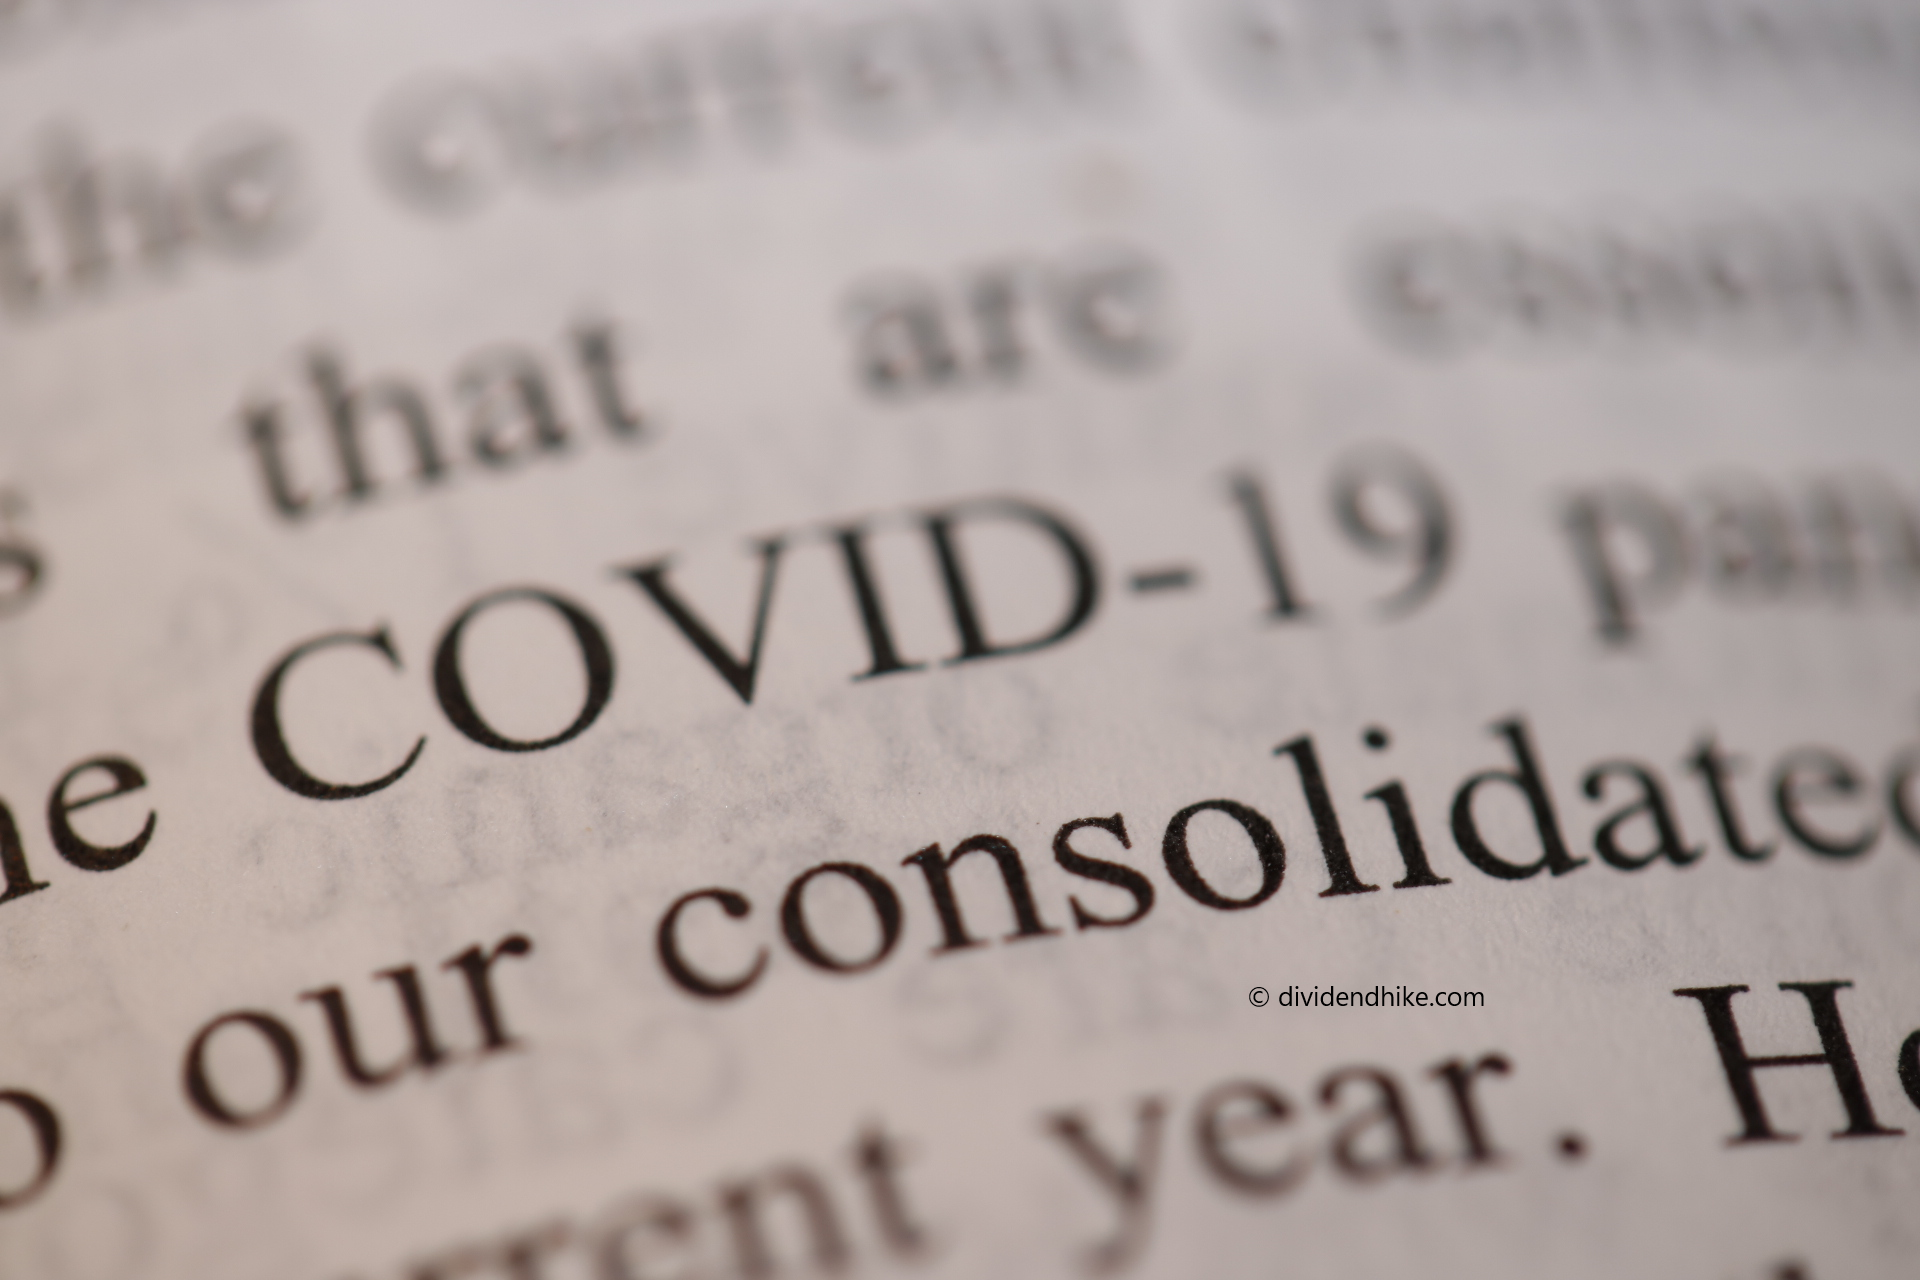 FCX was one of many companies suspending its dividend during the COVID-19 pandemic © DIVIDENDHIKE.COM